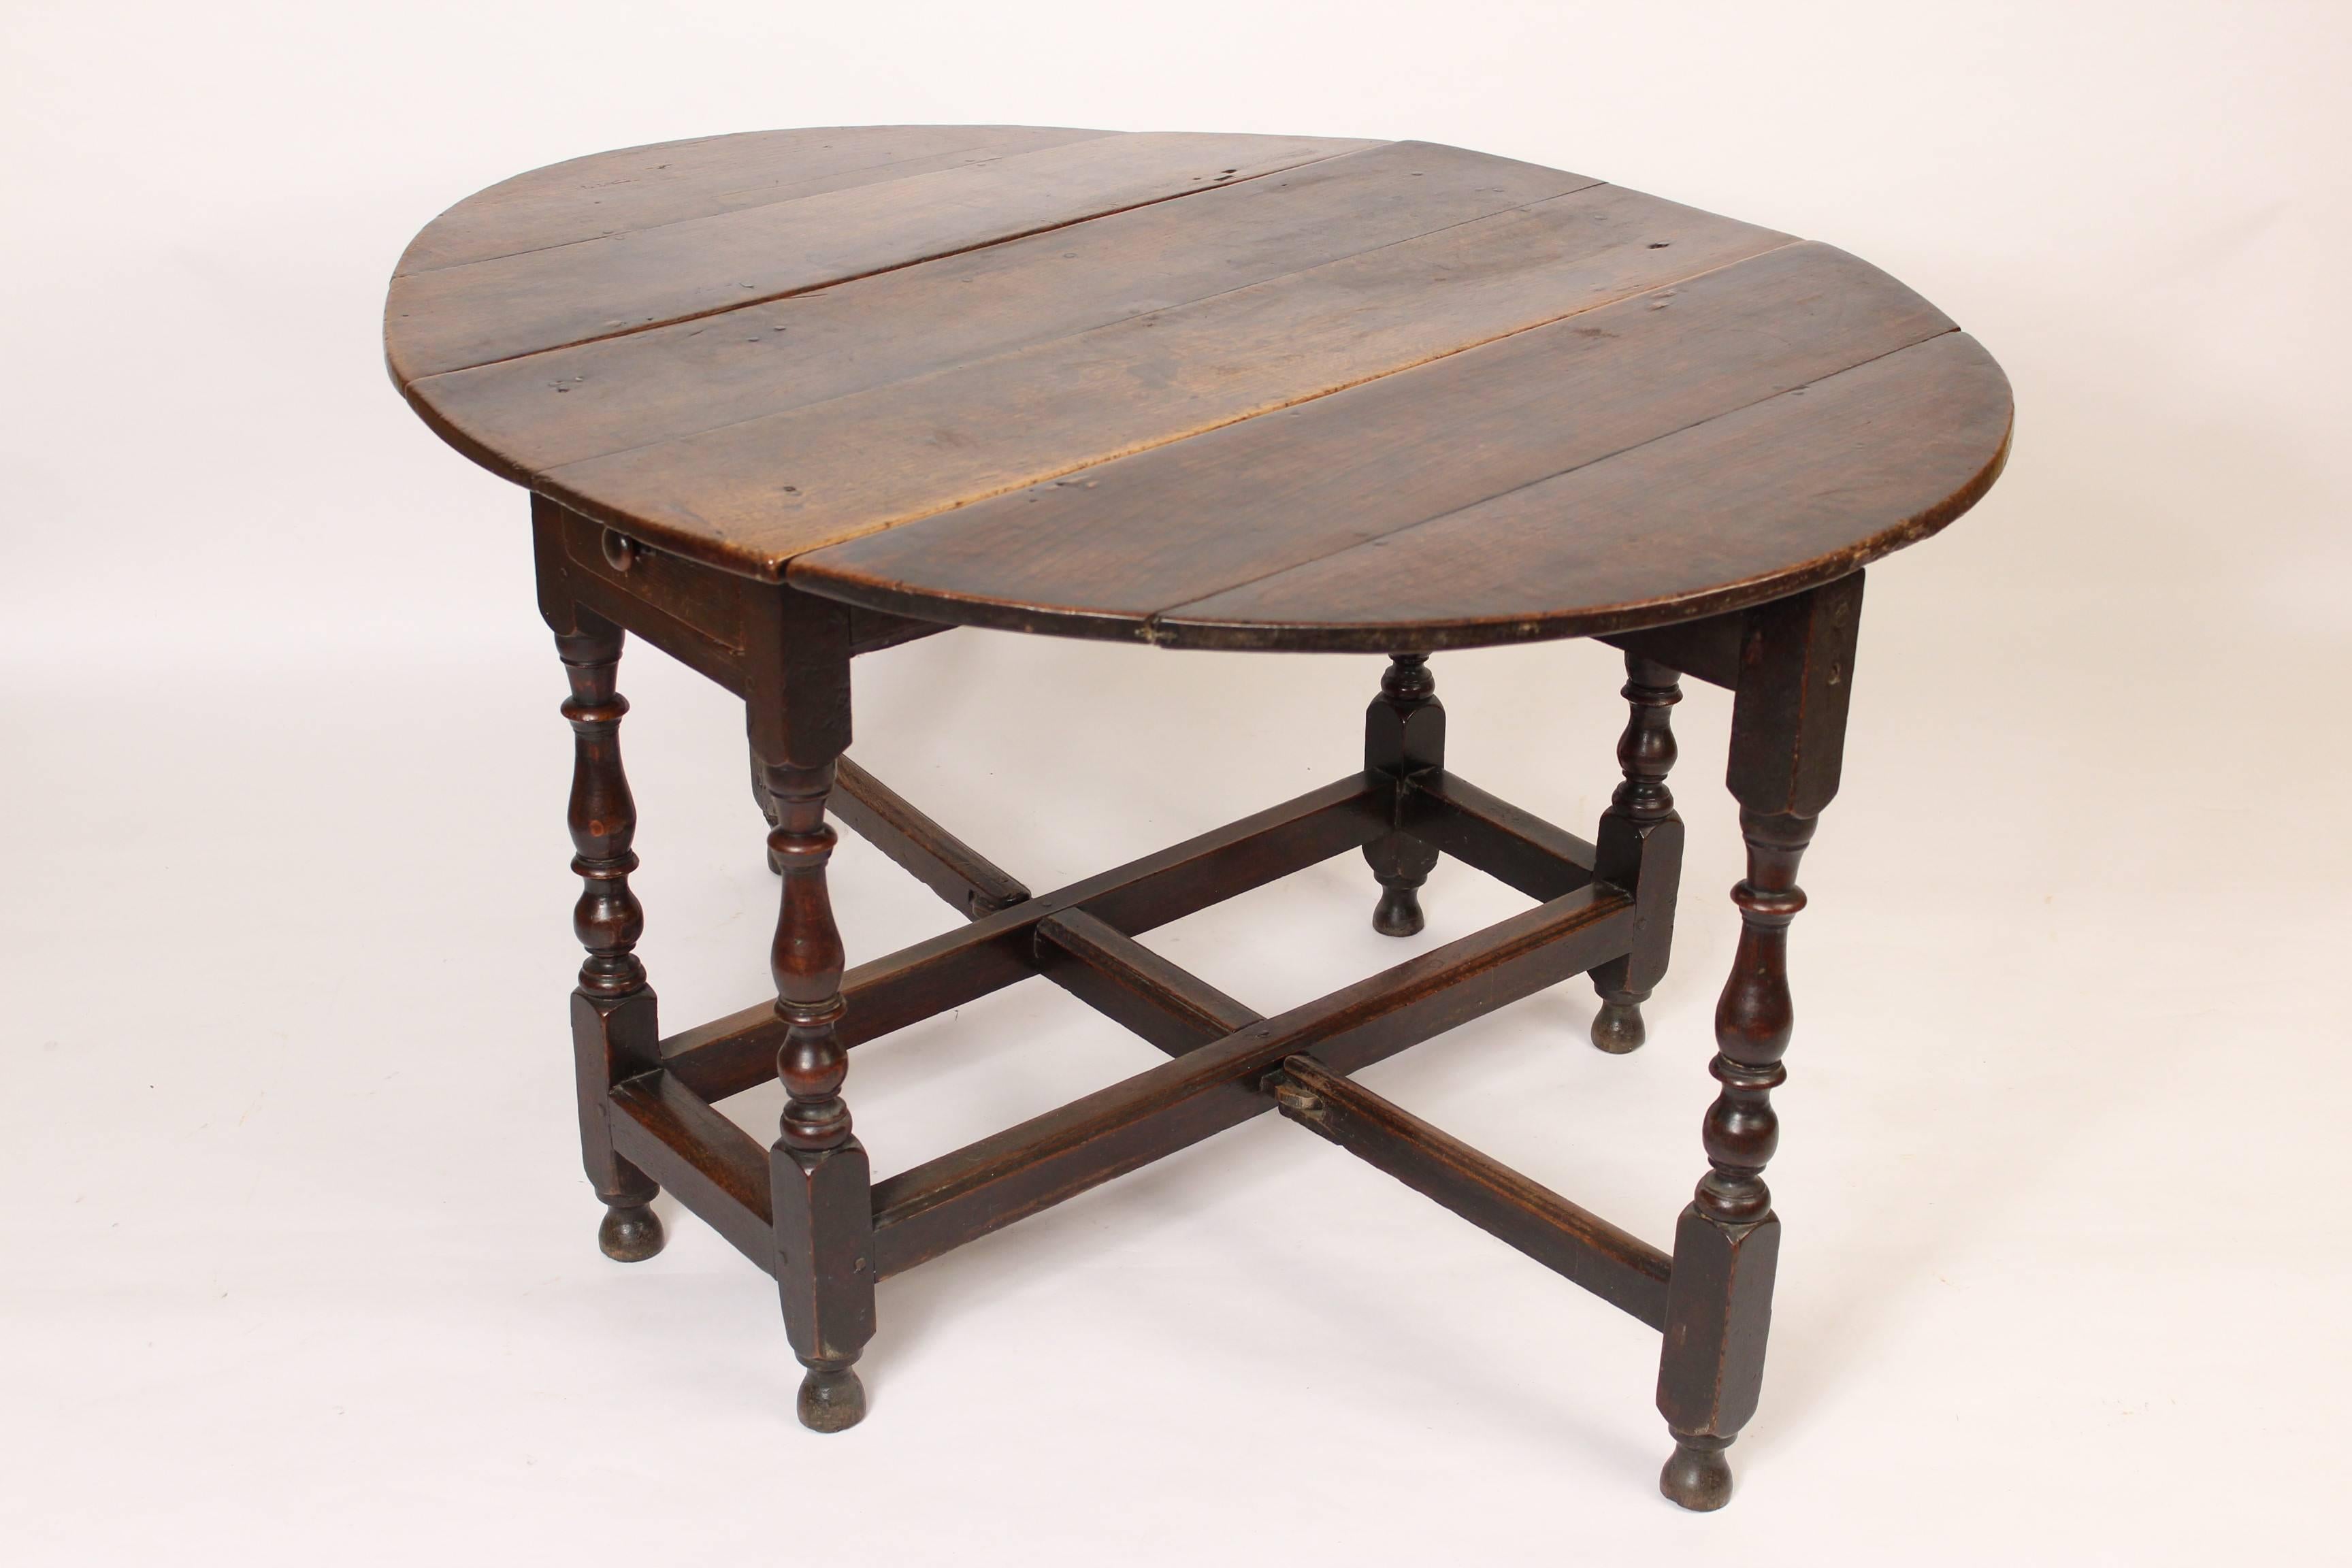 Antique English oak fate leg table, 19th century. This table has very nice color / patina. Dimensions when the drop leafs are raised, height 27.25